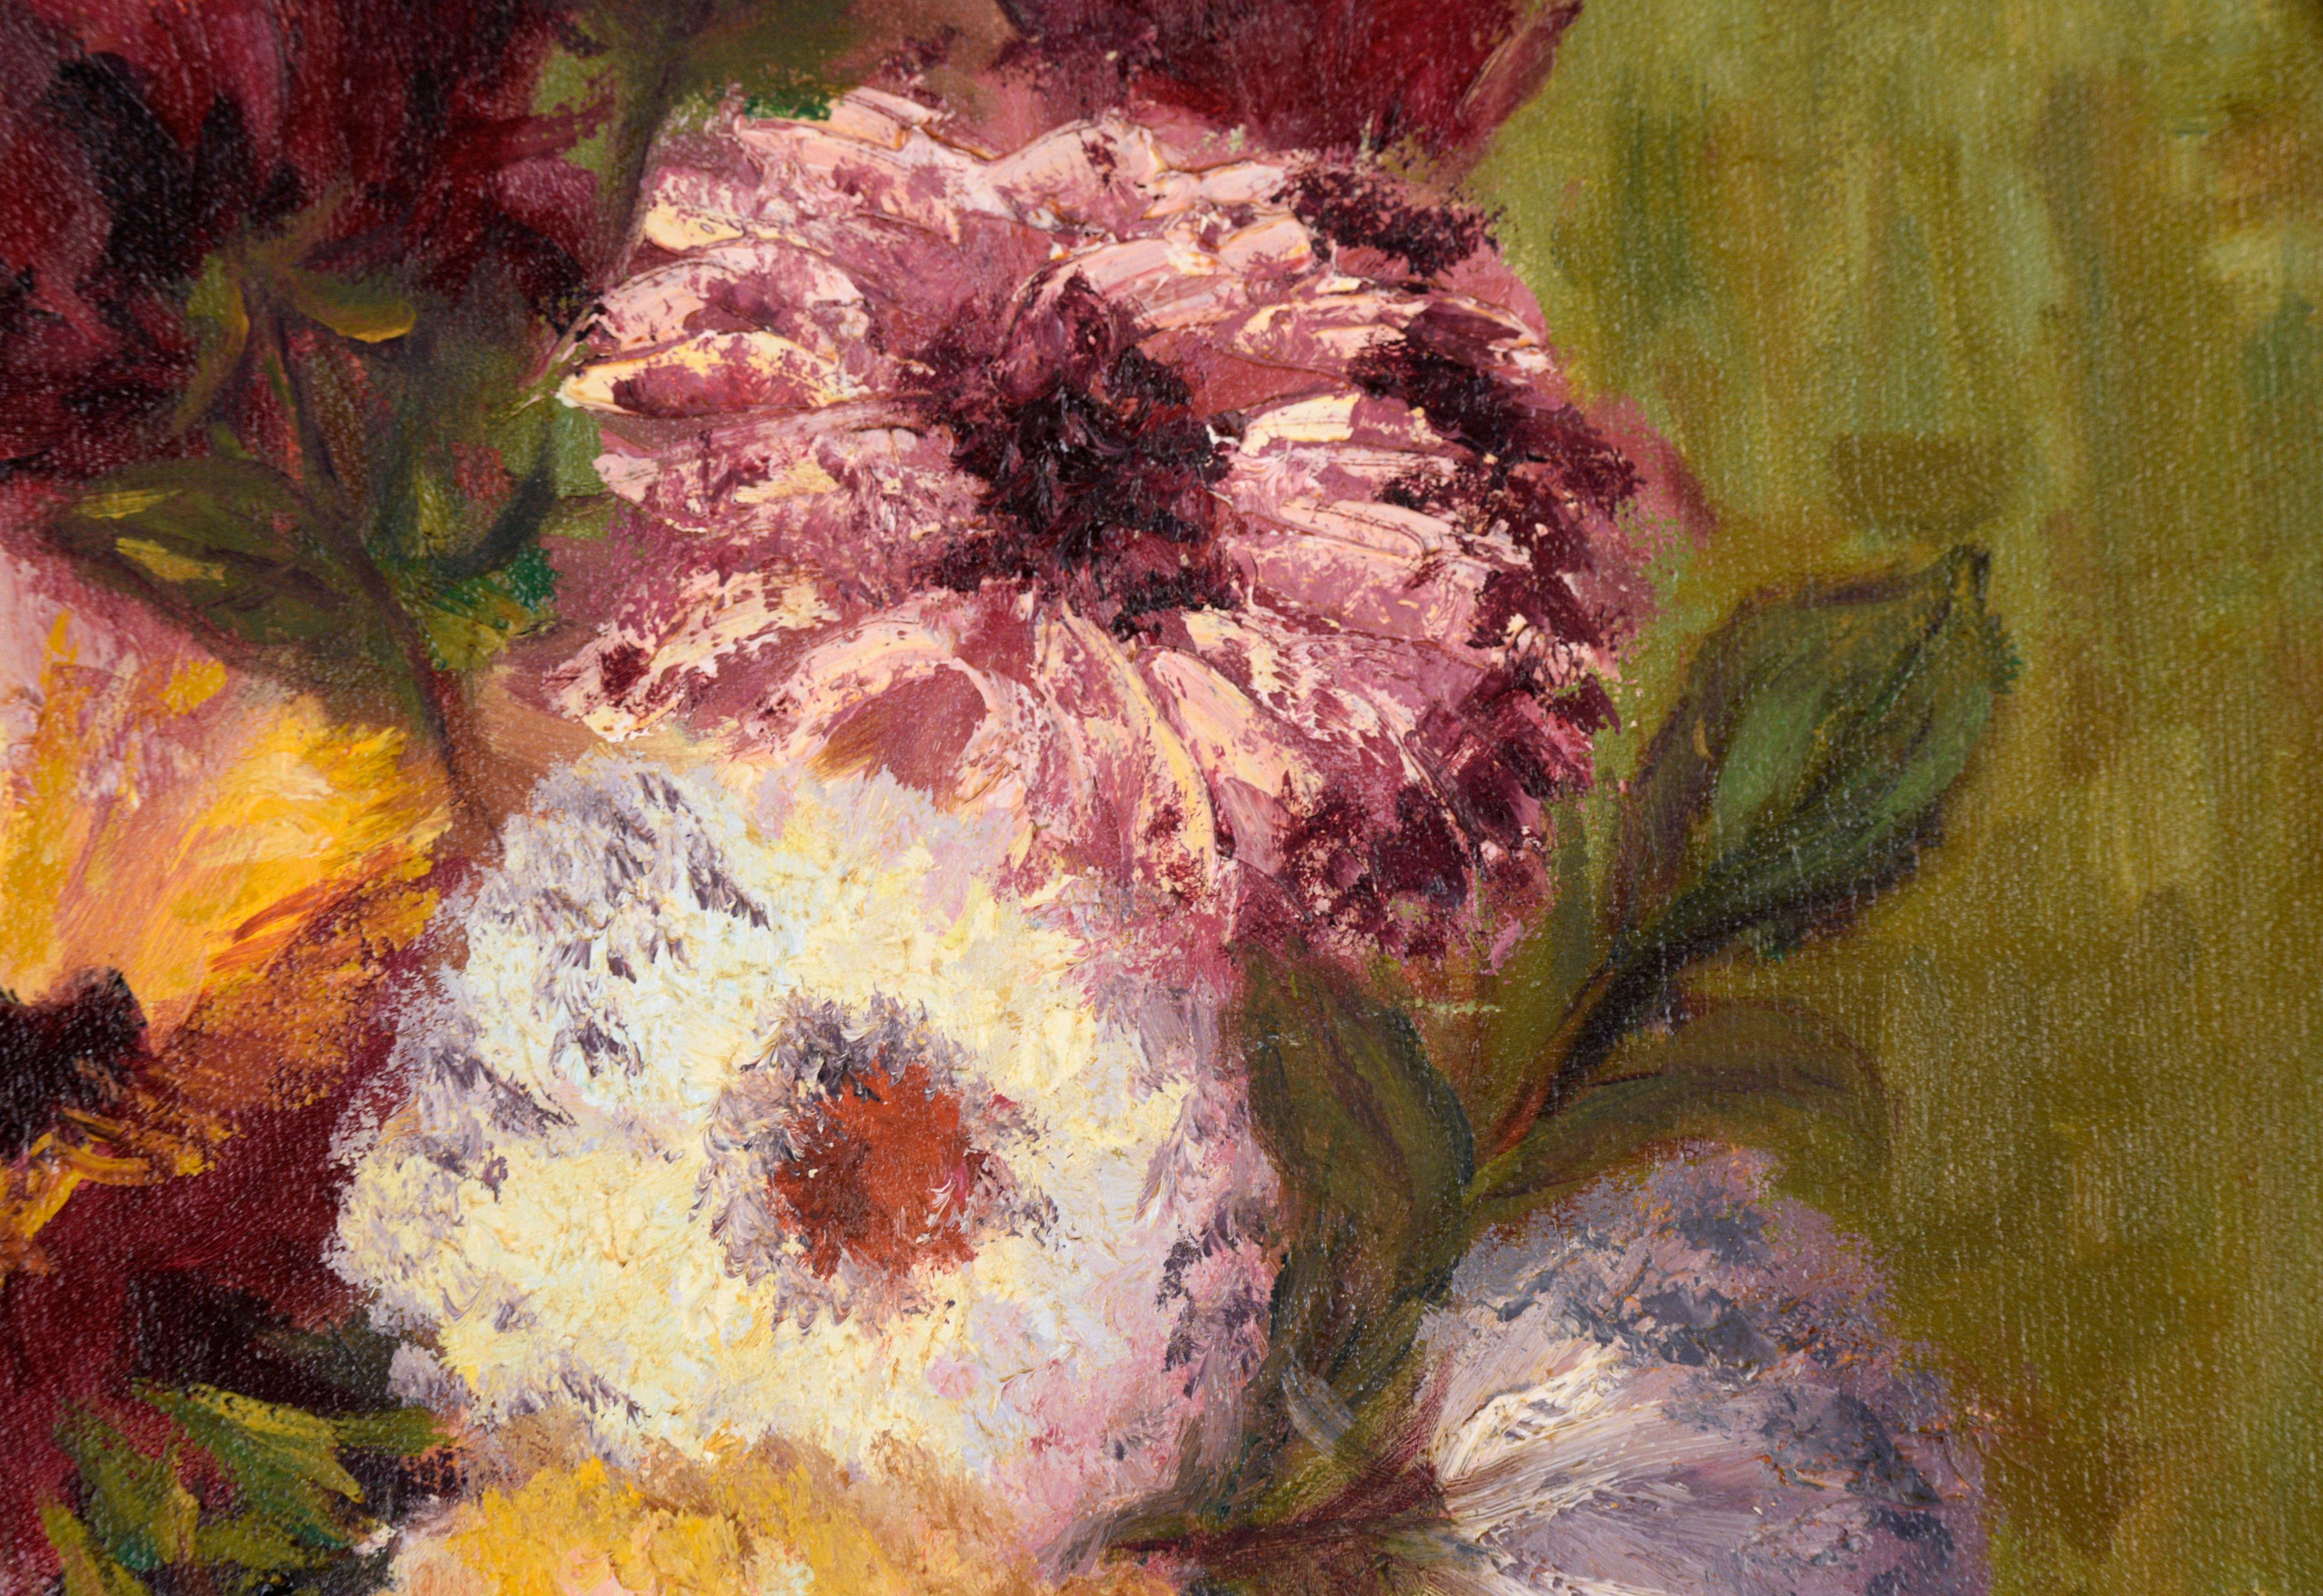 Floral Still Life with Zinnias and Roses - Oil on Canvas - Impressionist Painting by Unknown